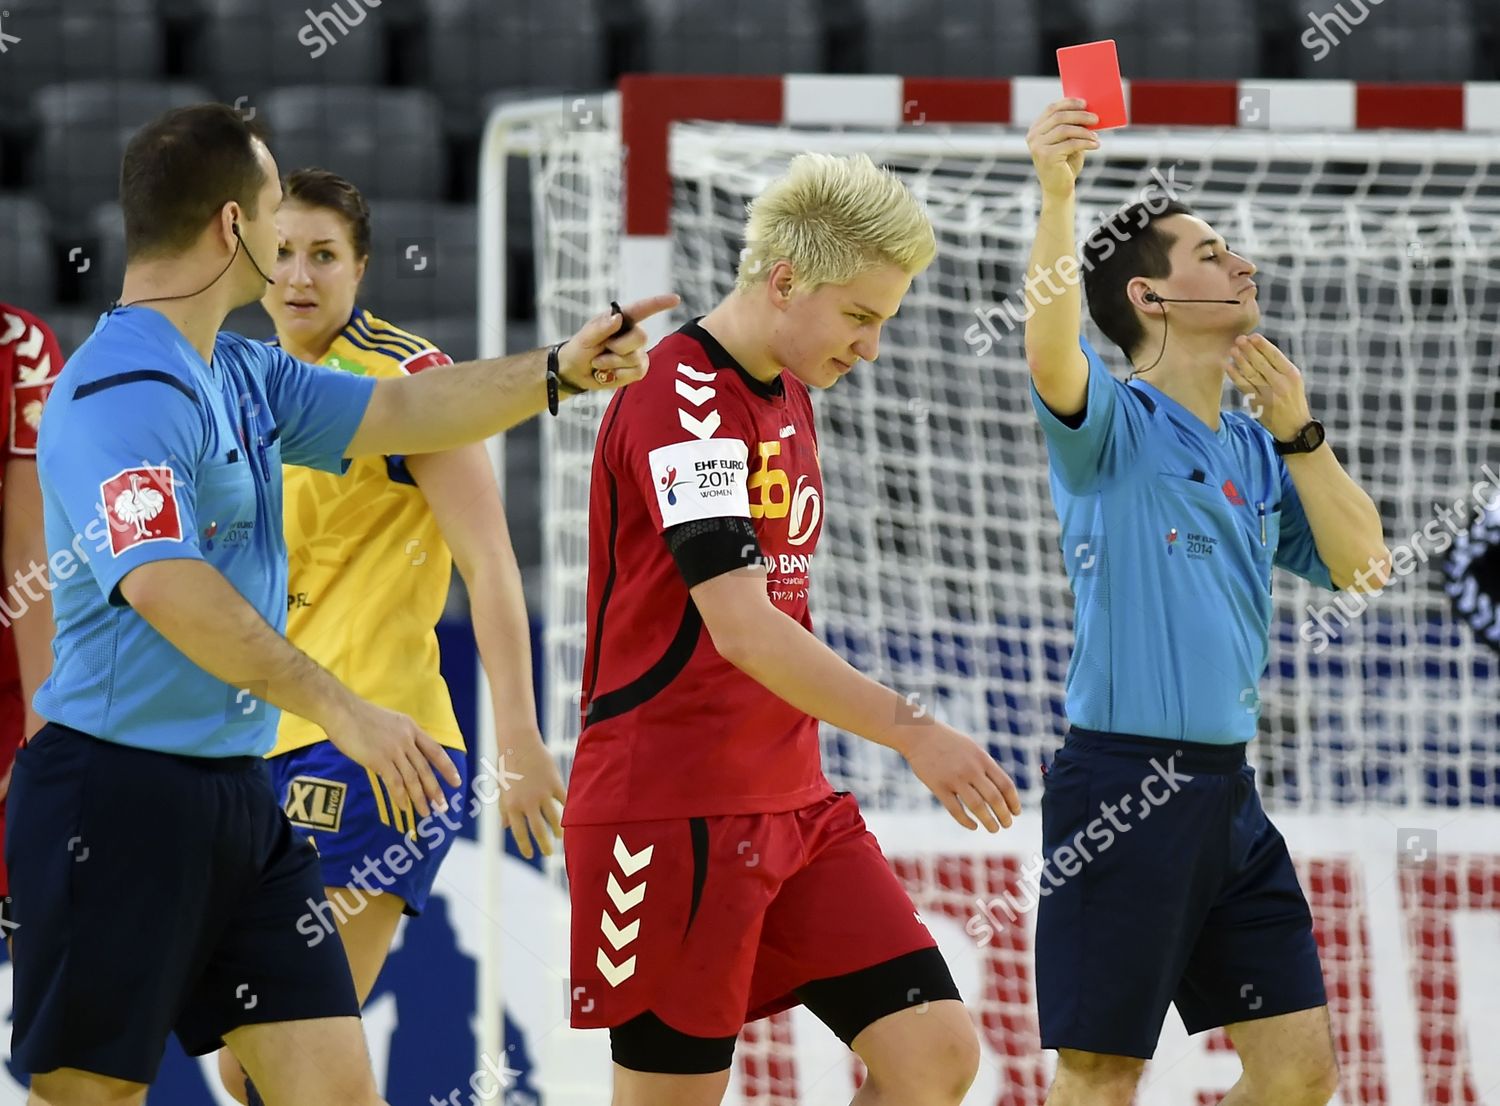 Referee Red Card Montenegro Player Editorial Stock Photo - Stock Image | Shutterstock